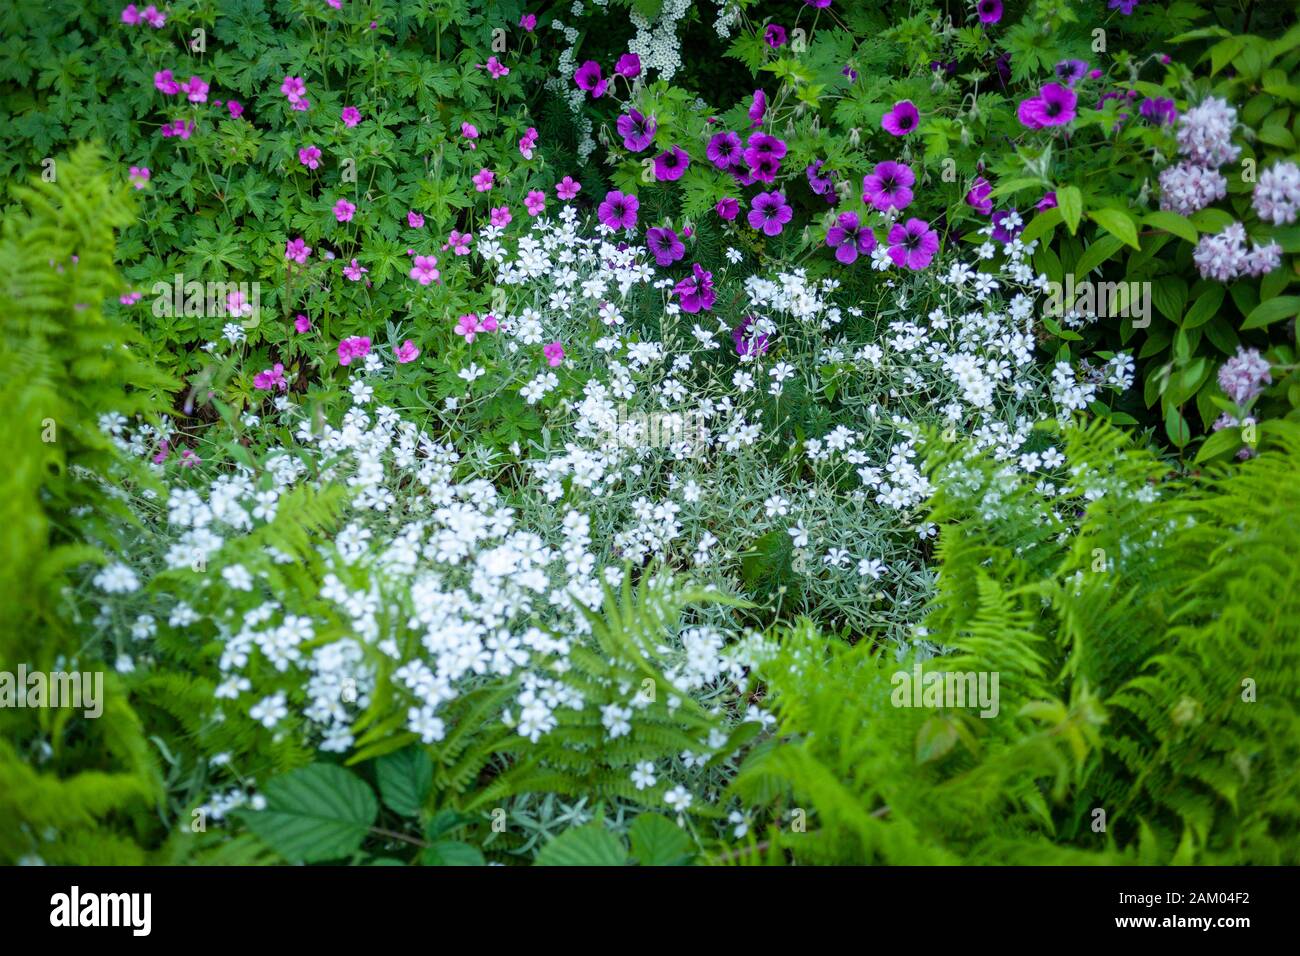 A bed of white and purple flowers bloom among ferns and other green foliage.  This lushness of can be seen in late spring or early summer in Scotland. Stock Photo